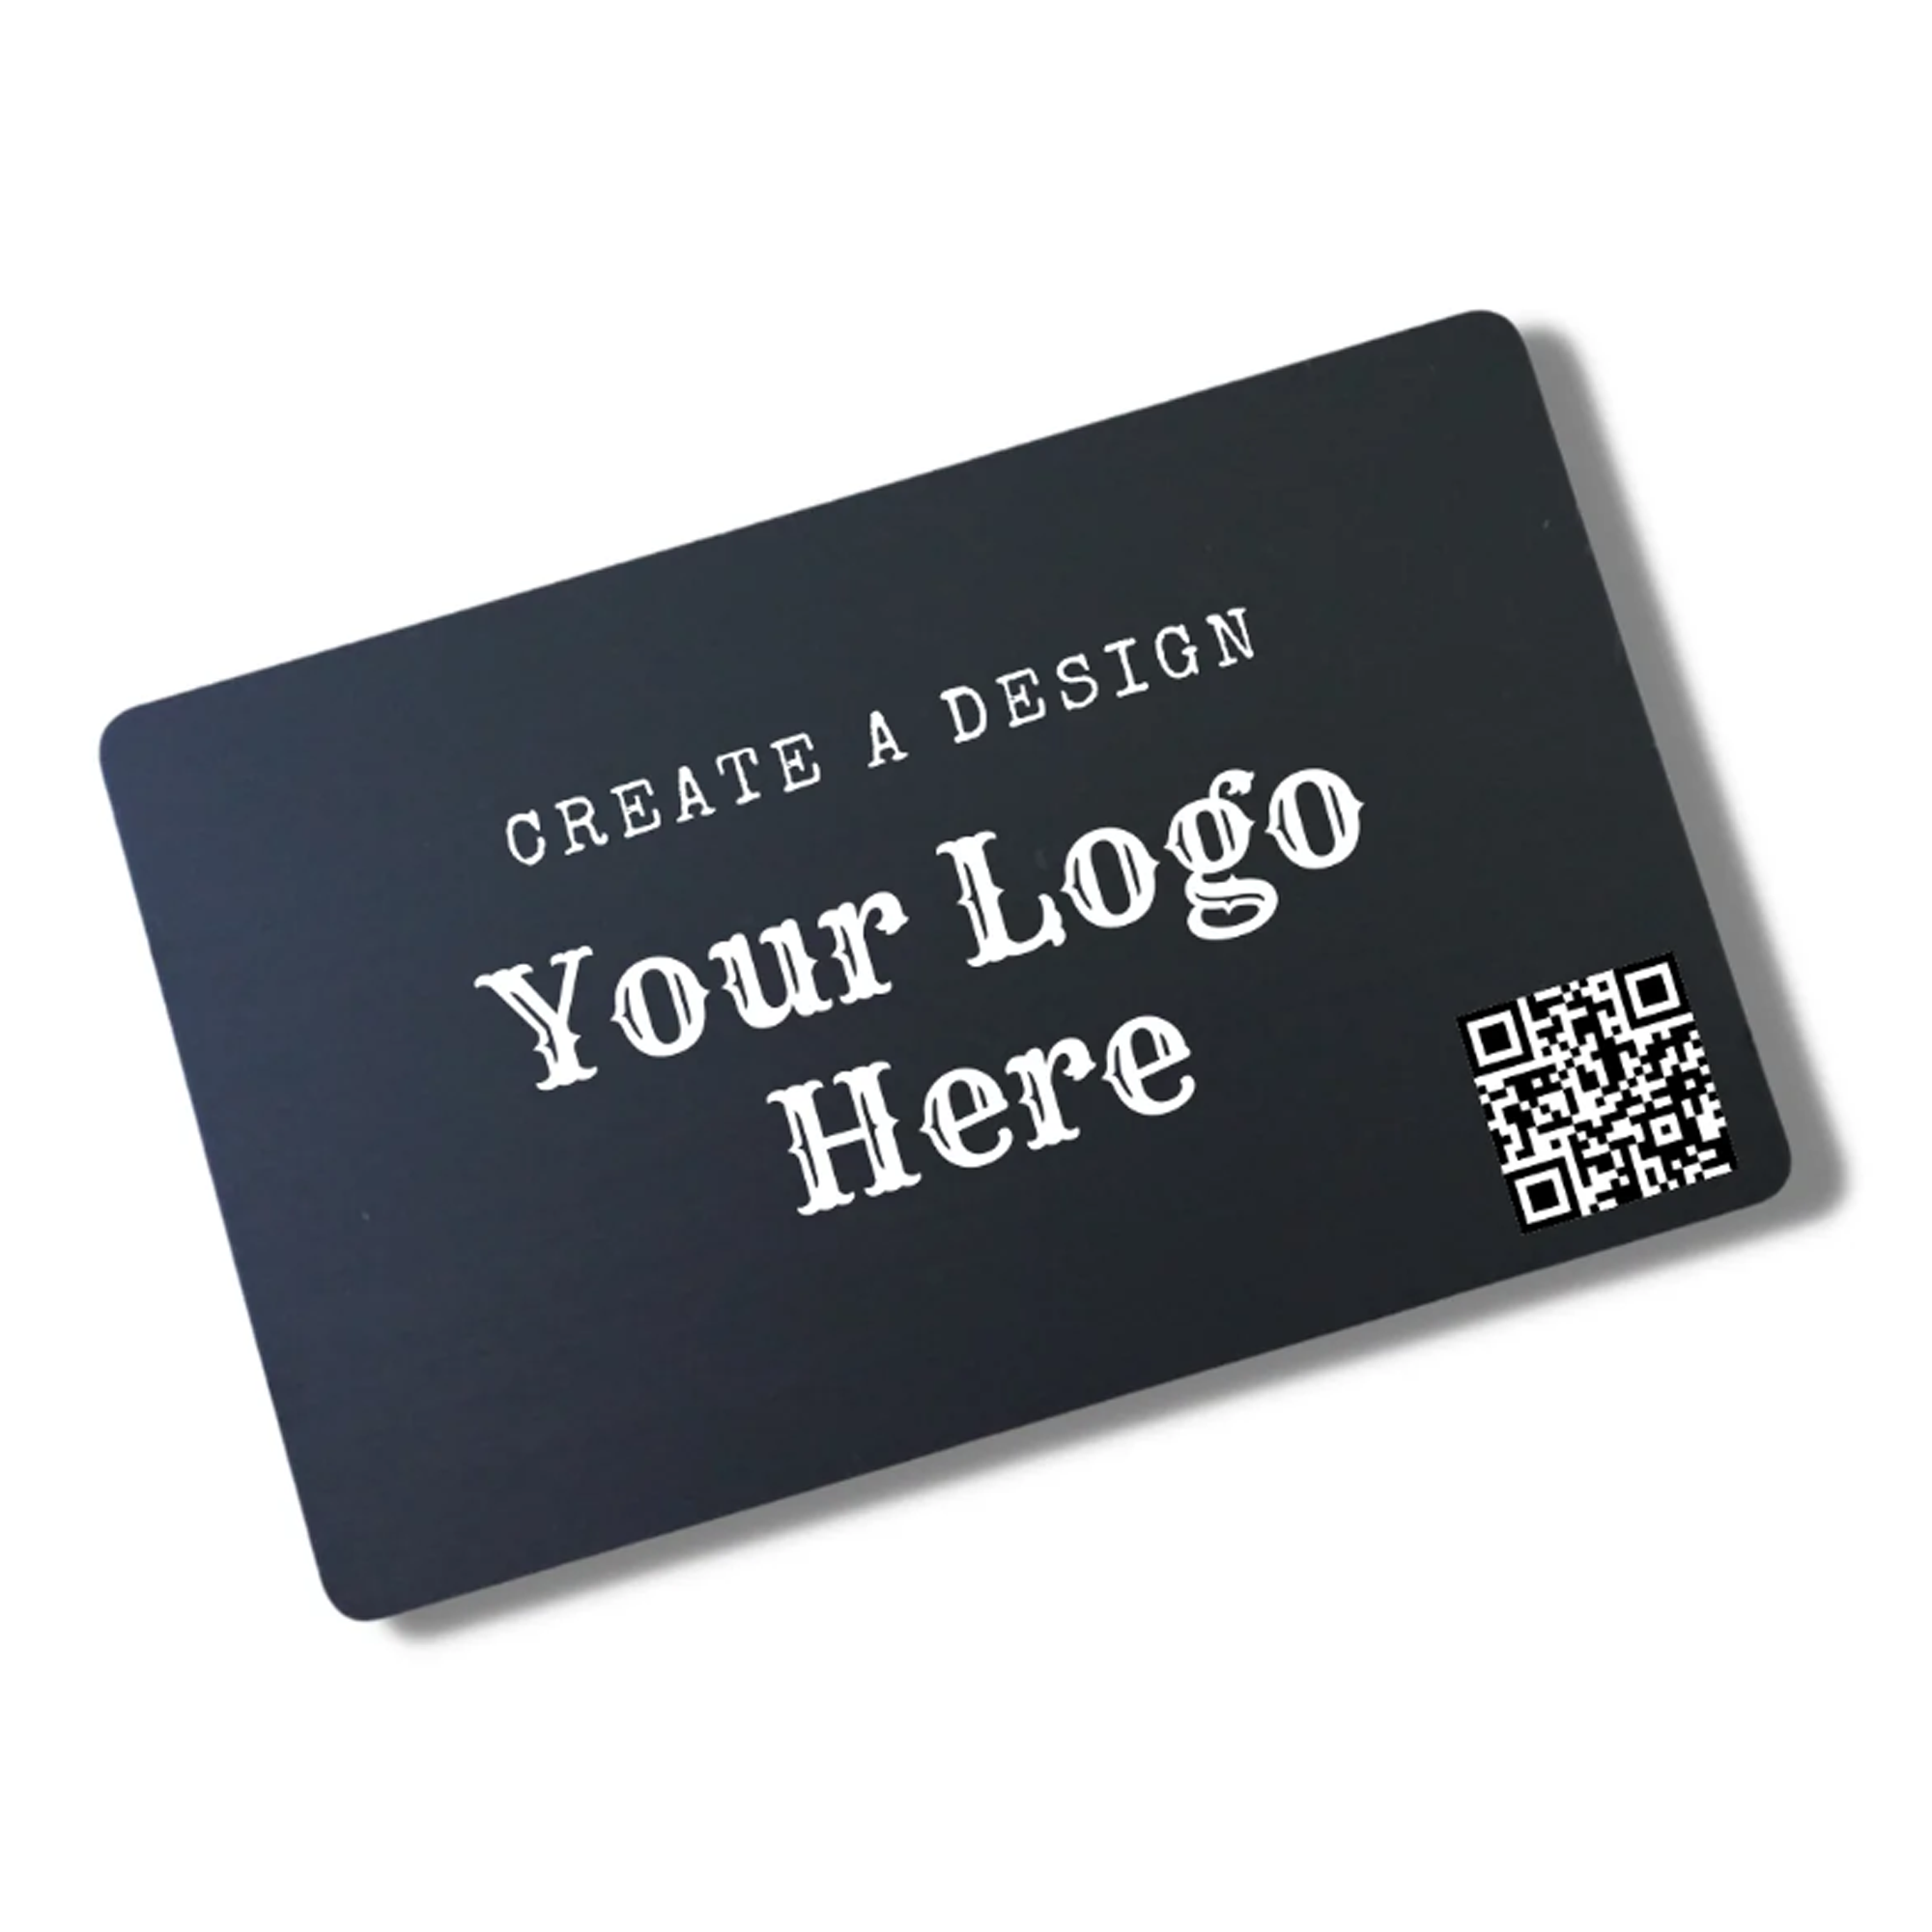 Metal Business Cards with Digital Business Card Feature